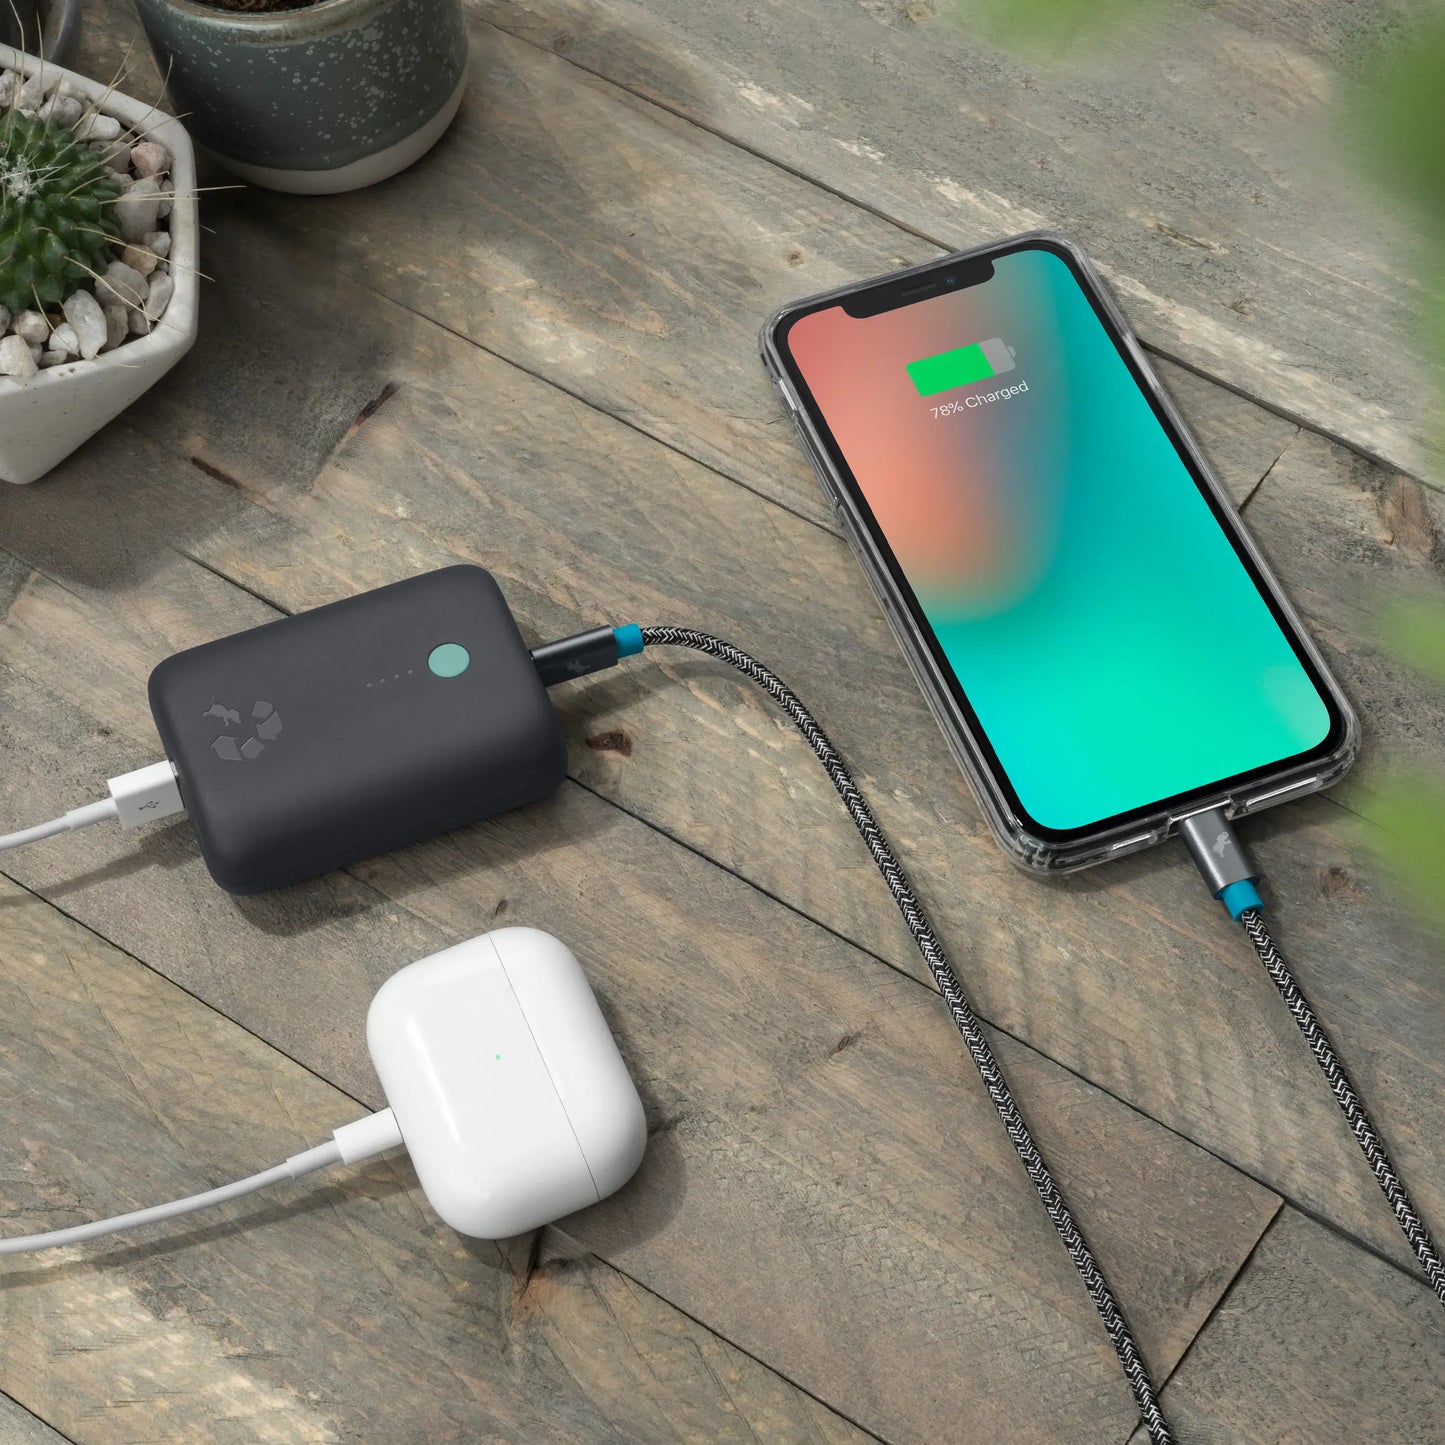 Charcoal portable charger with green button connected to airpods and cell phone on table.